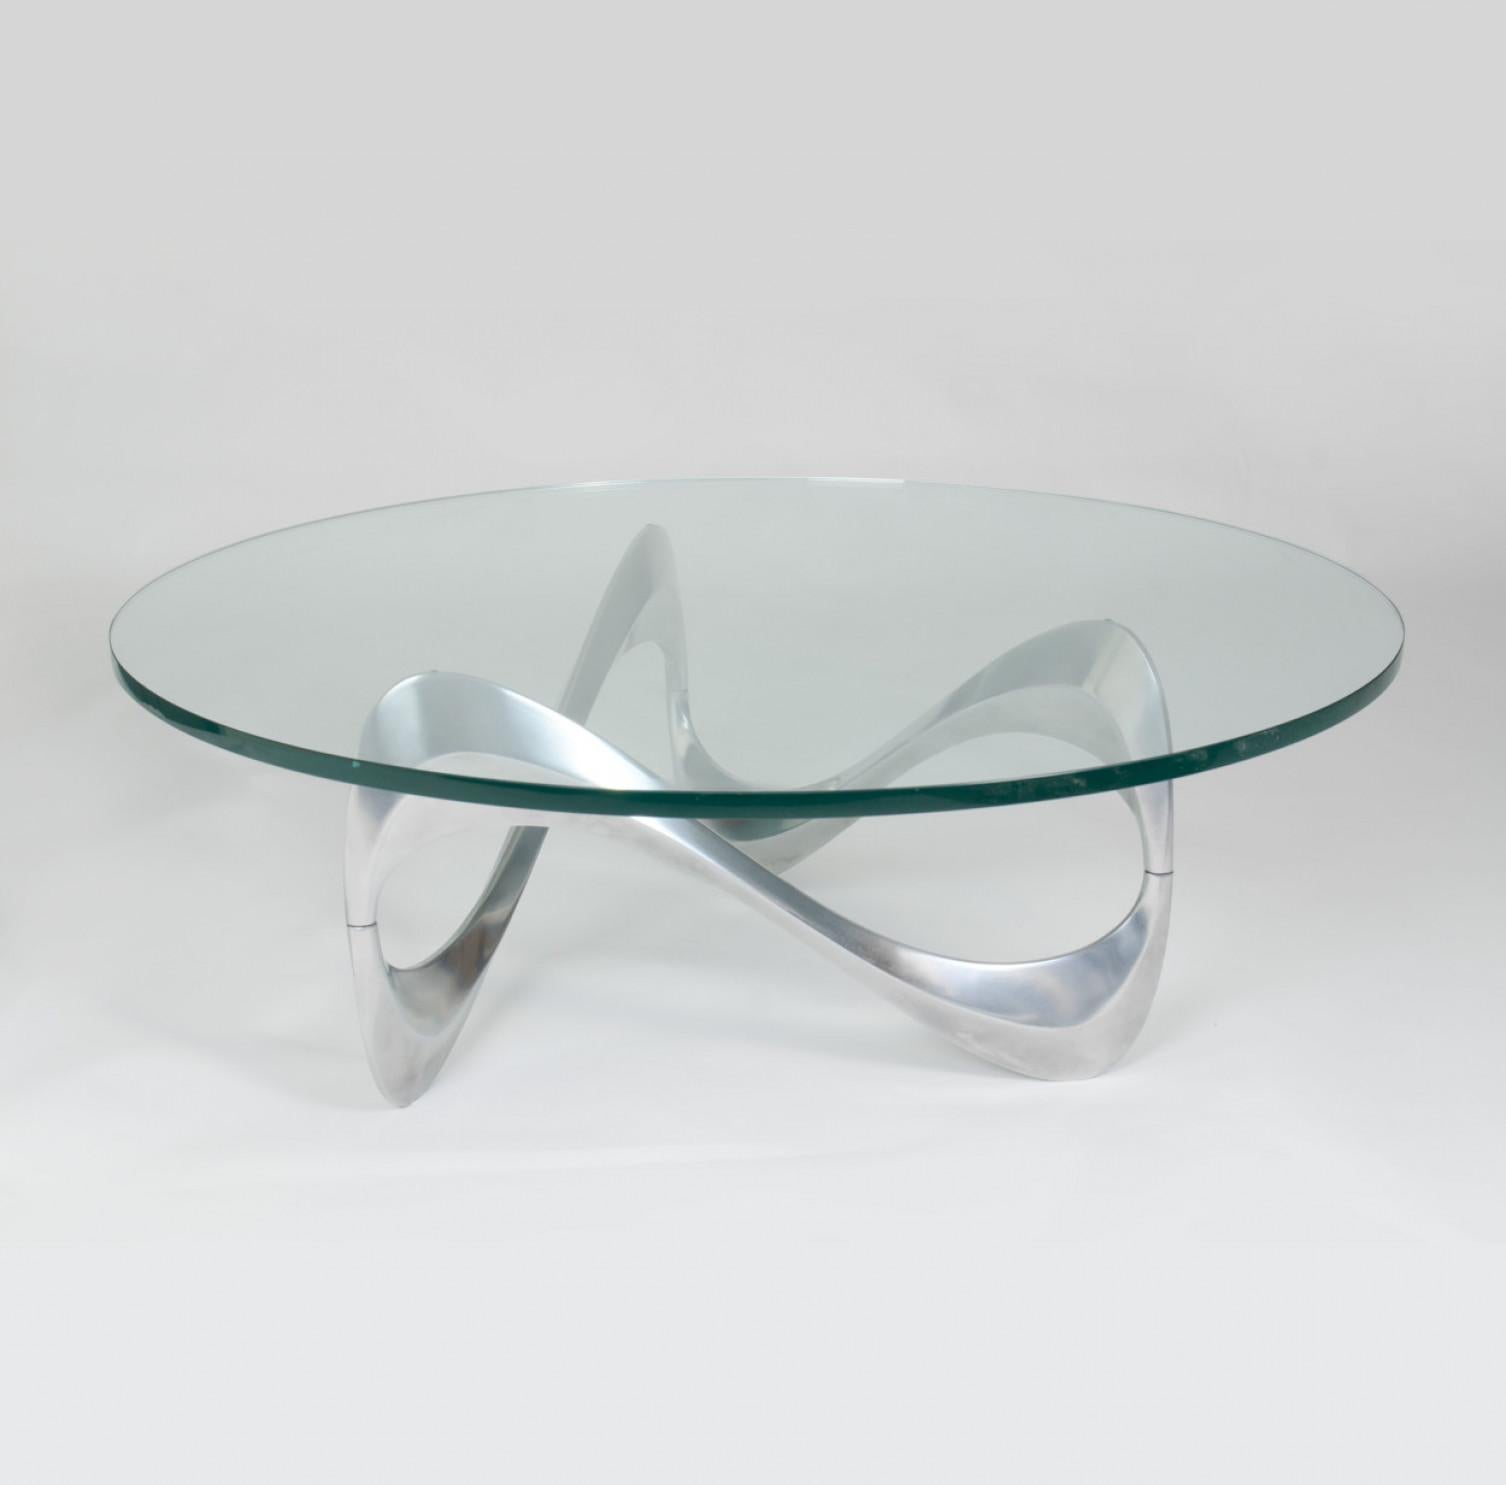 Mid-20th Century Sculptural Chrome Coffee or Side Table by Knut Hesterberg, 1960 For Sale